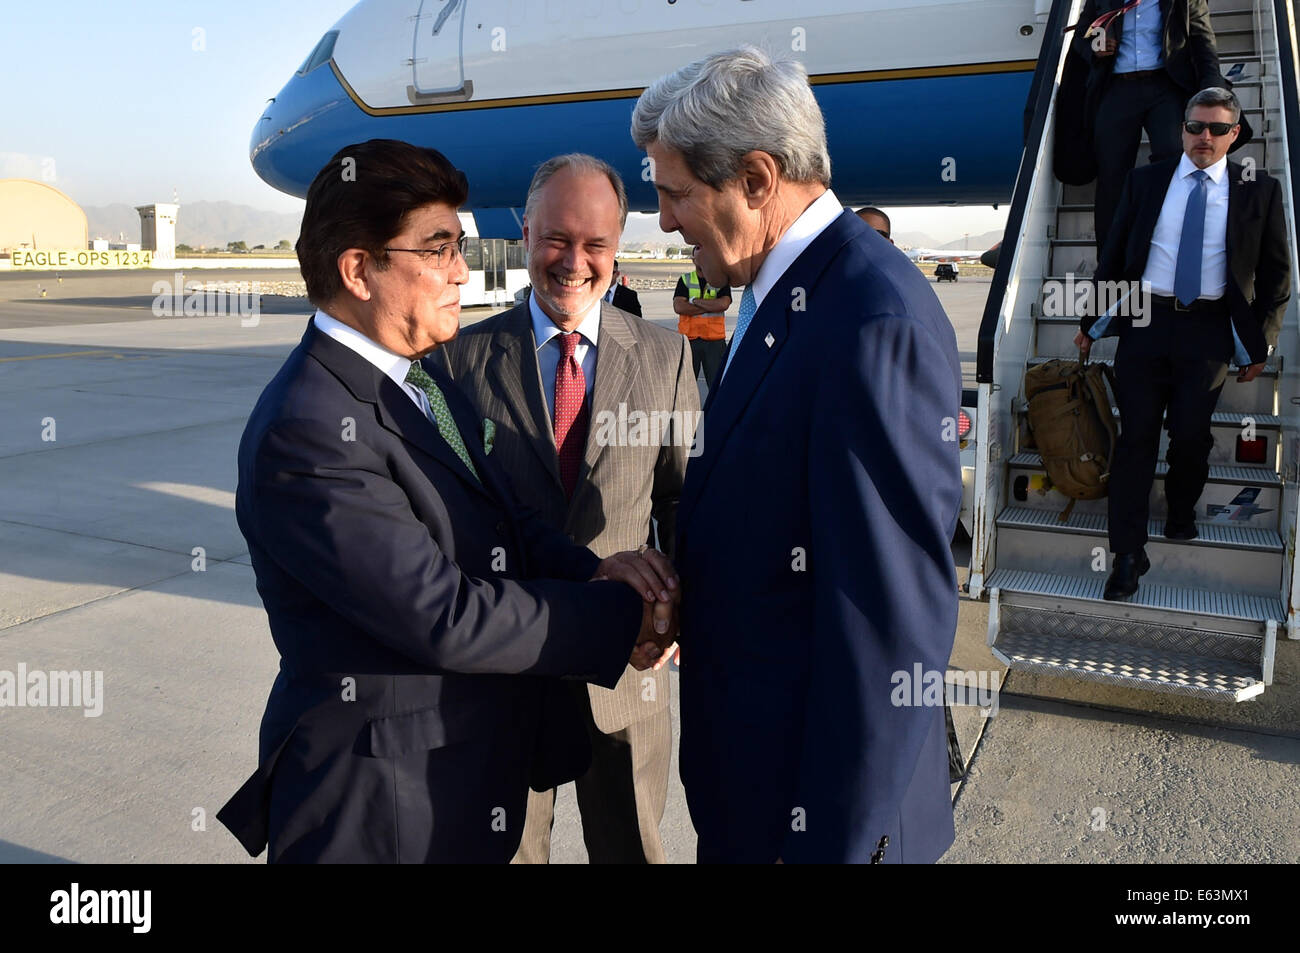 U.S. Secretary of State John Kerry, flanked by U.S. Ambassador to Afghanistan James Cunningham, shakes hands with Afghan Ministry of Foreign Affairs Chief of Protocol Hamid Siddiq upon arriving in Kabul on August 7, 2014, for discussions about the country Stock Photo